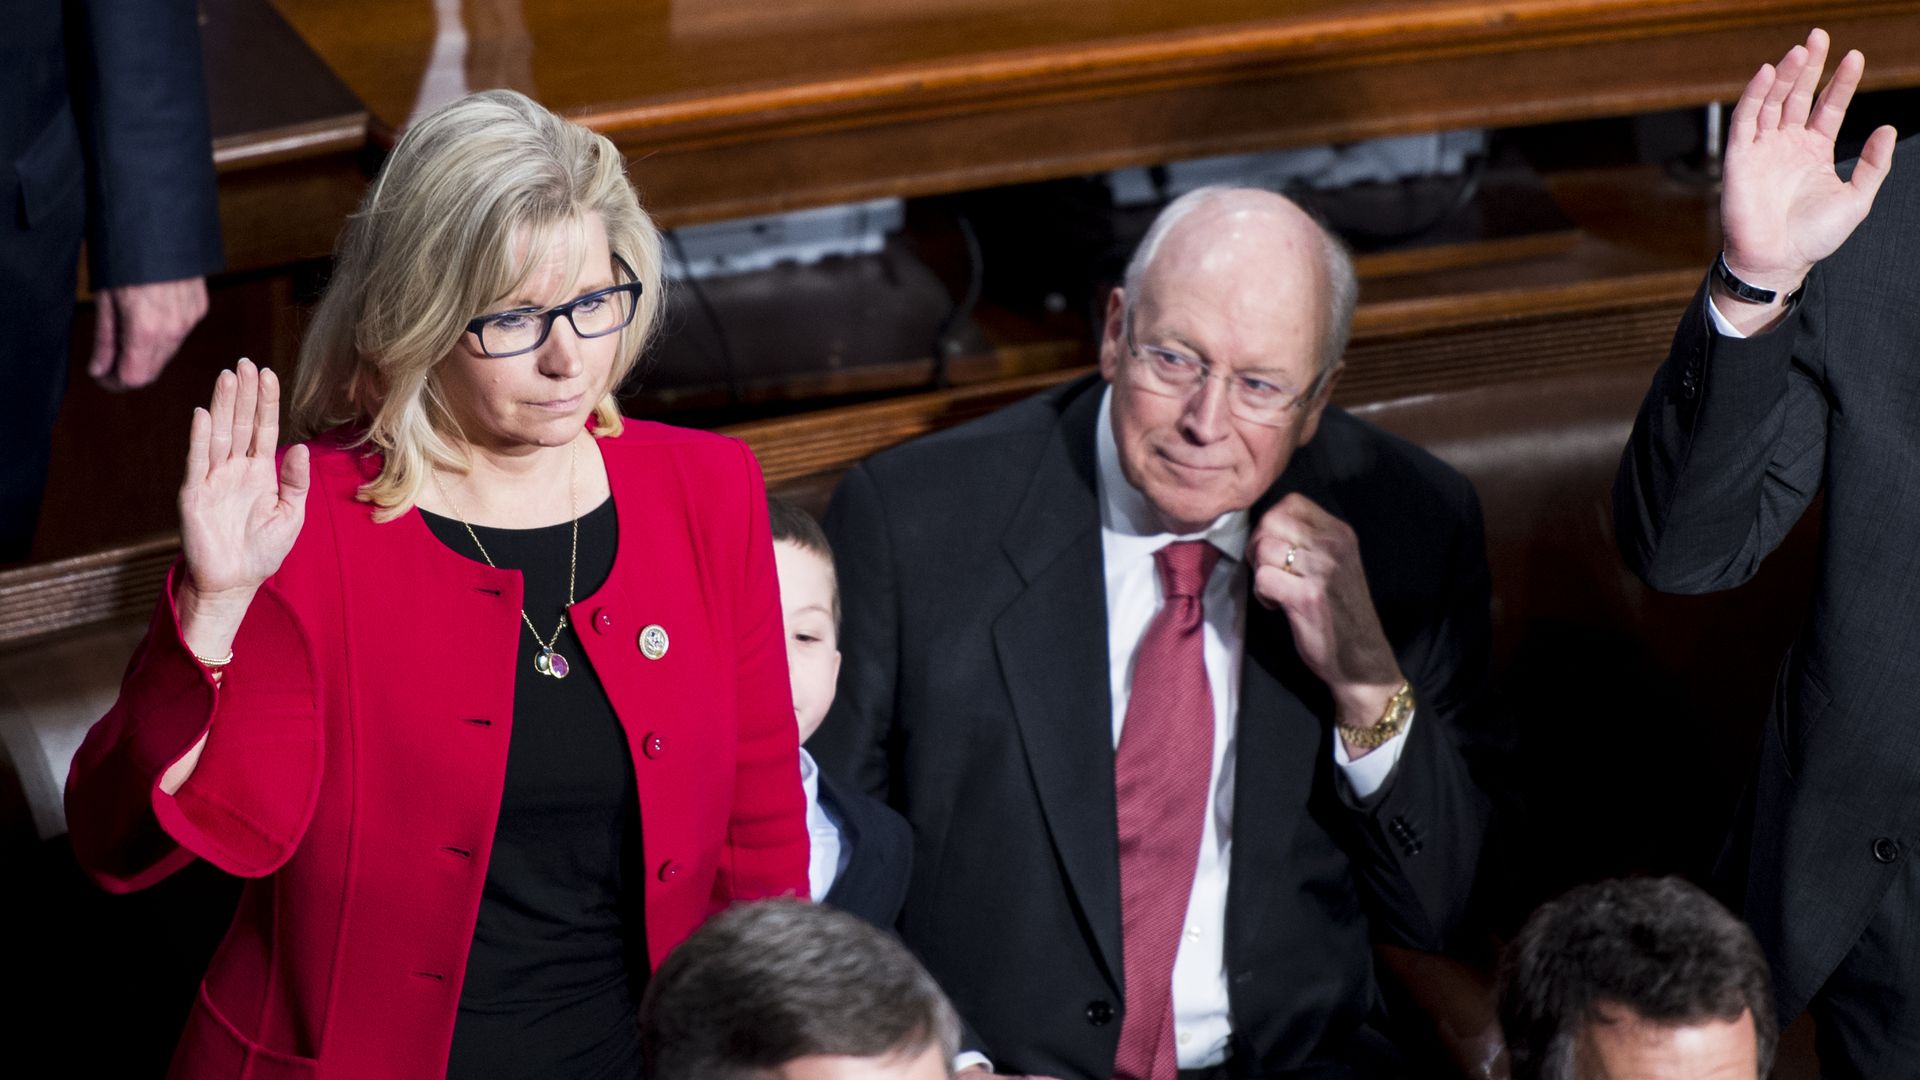 Former Vice President Dick Cheney and his daughter Rep. Liz Cheney